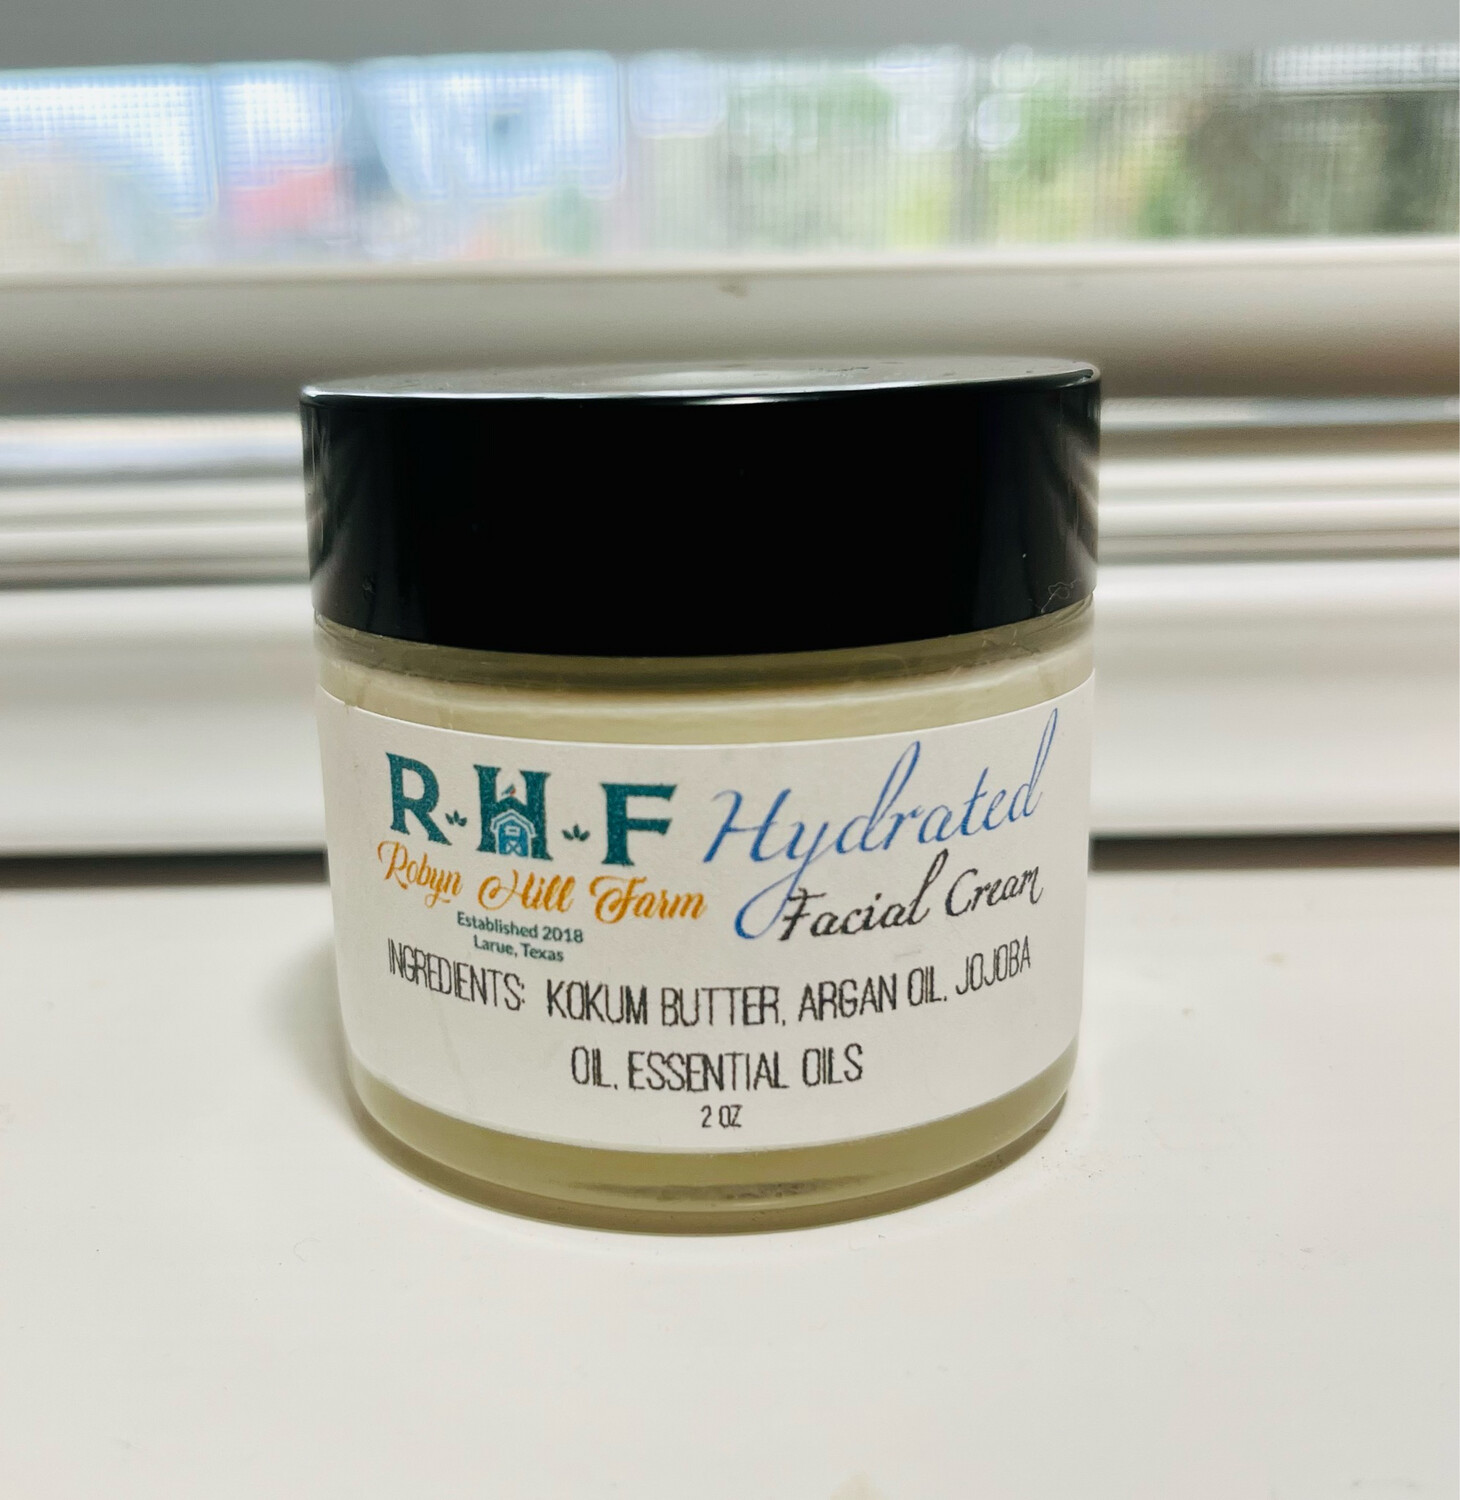 Hydrated Face Cream